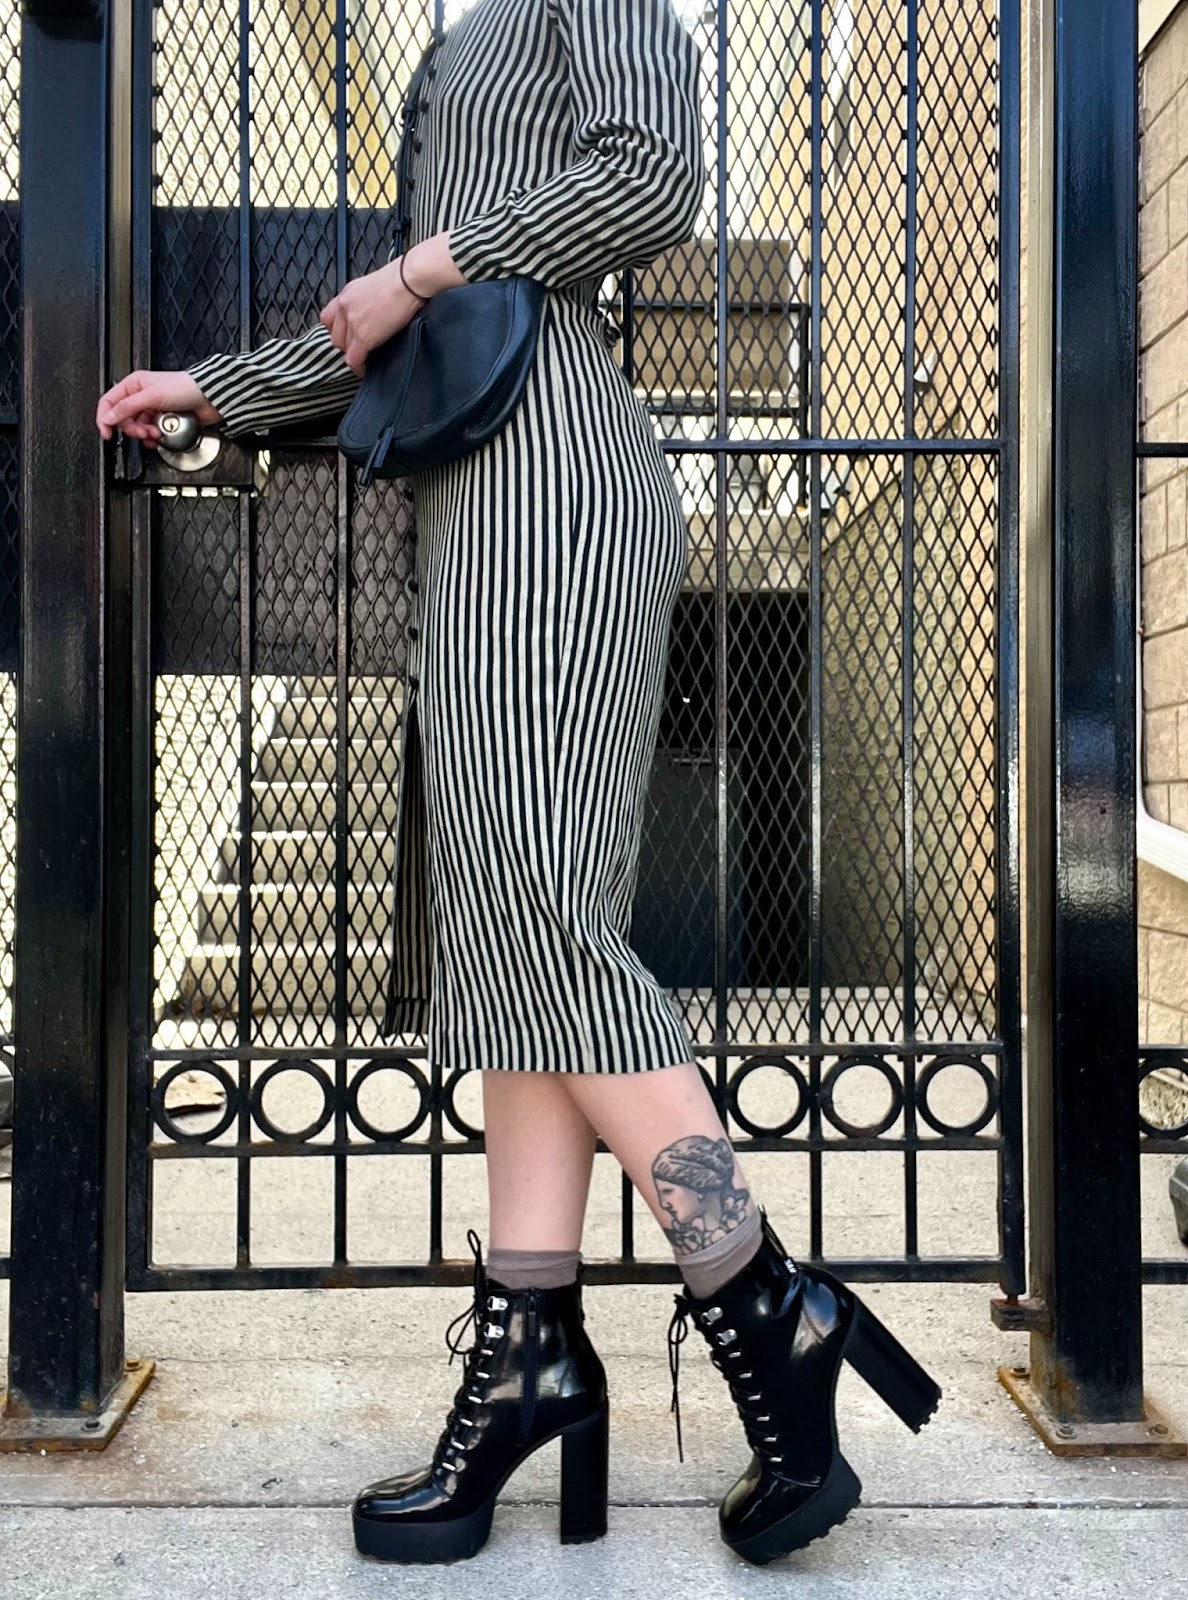 an image of a woman from the shoulders down. She is turned to the side in front of a metal door. she is wearing a long sleeve striped dress, and has accessorized with a black purse, belt and high heeled boots 